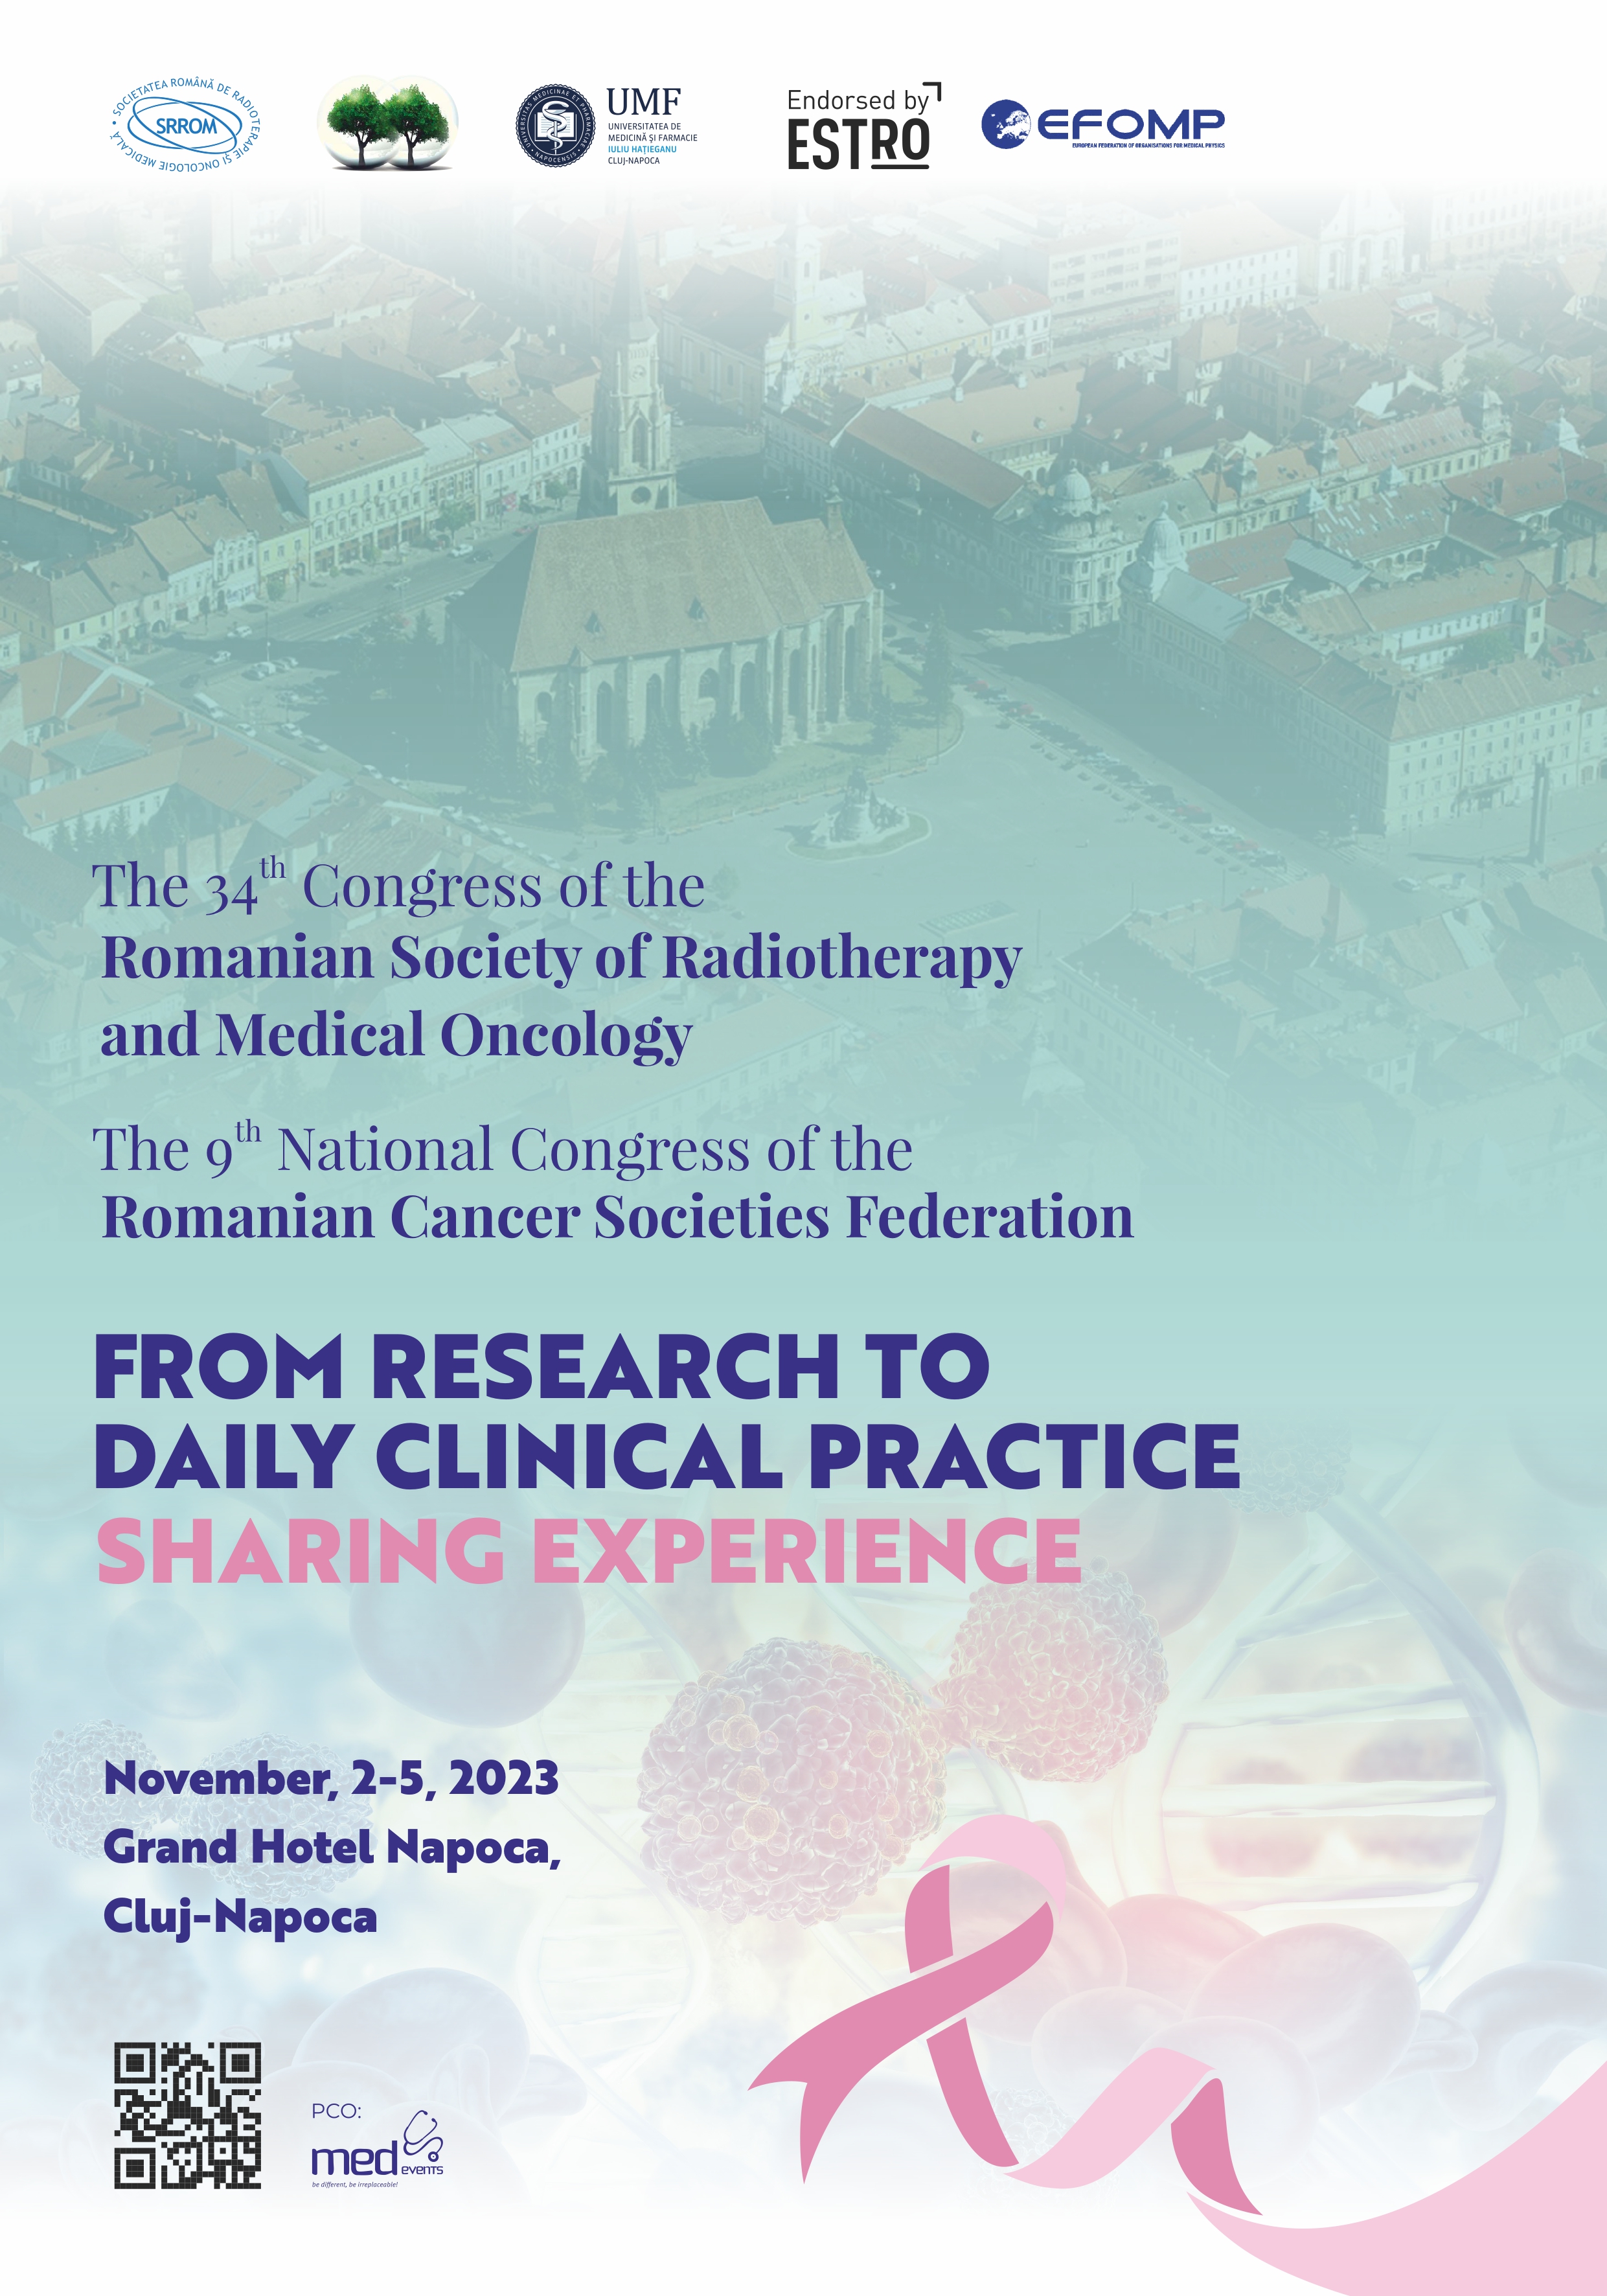 The 34th National Congress of the Romanian Society of Radiotherapy and Medical Oncology